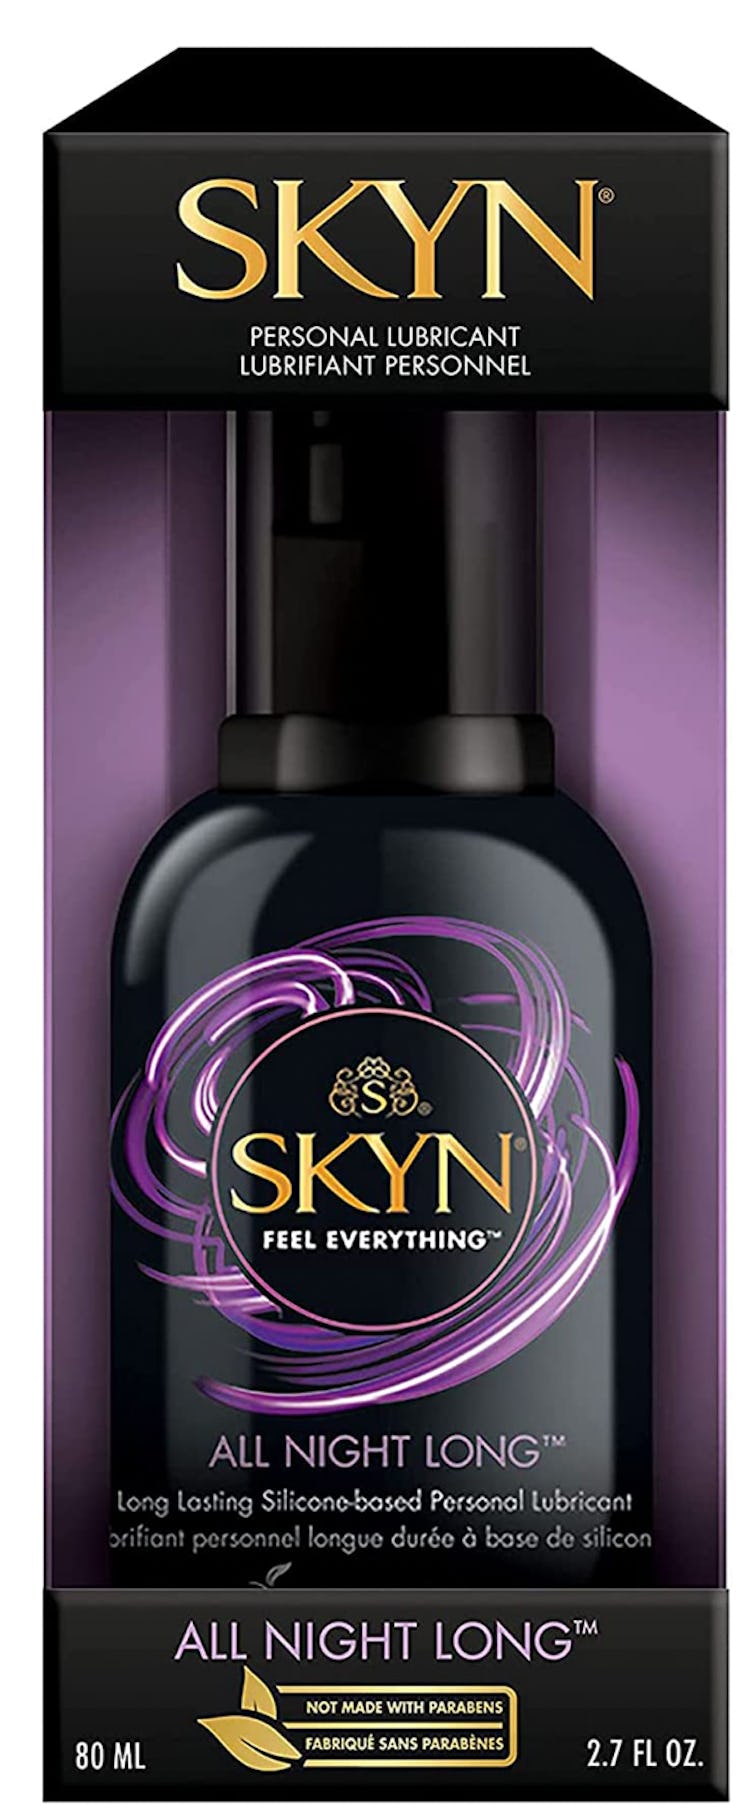 SKYN All Night Long Premium Silicone-Based Lubricant, 2.7 Ounce